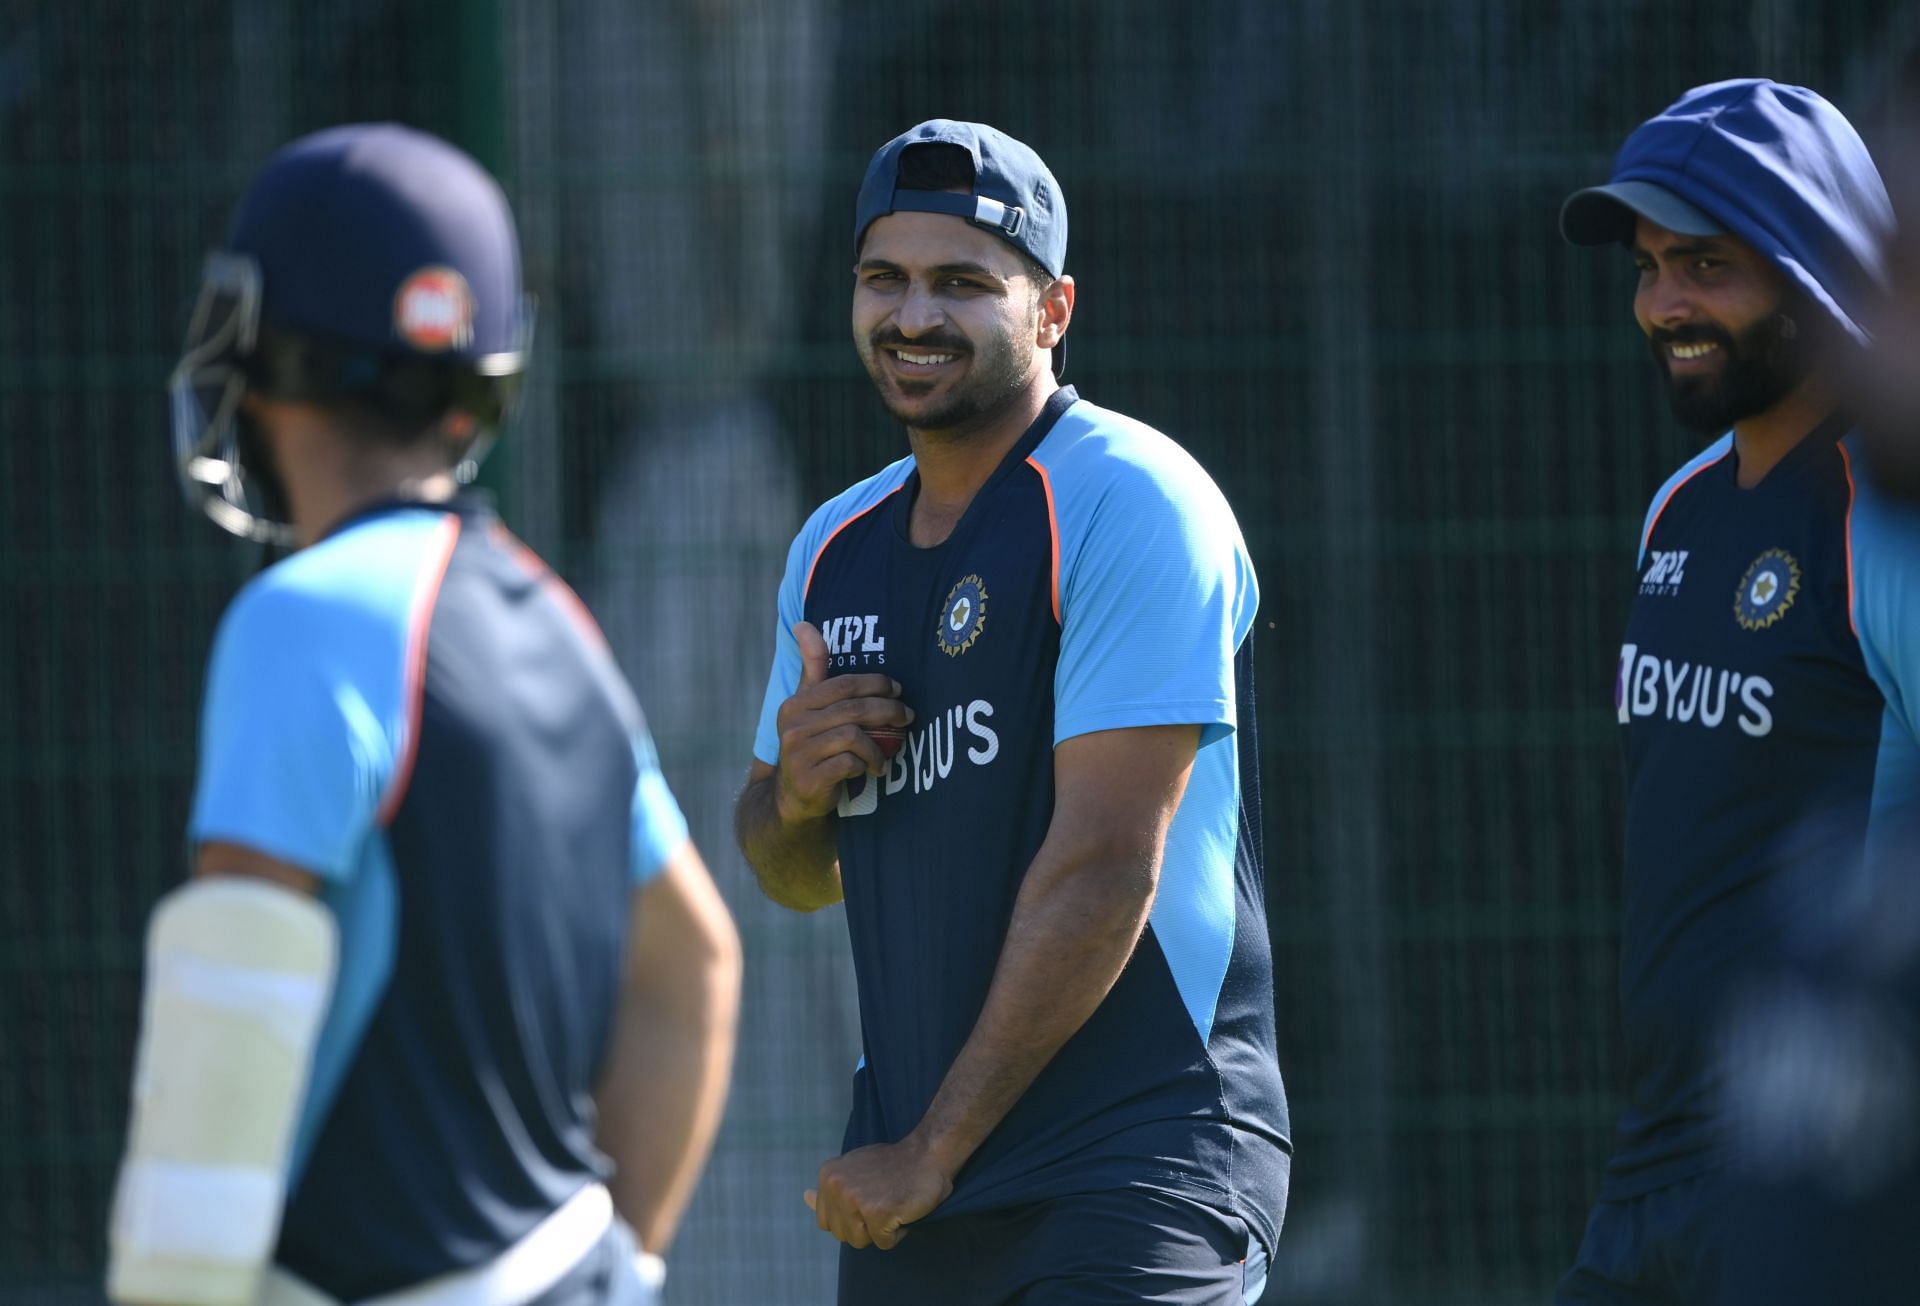 Shardul Thakur was a last-minute addition to the Indian squad for the T20 World Cup 2021